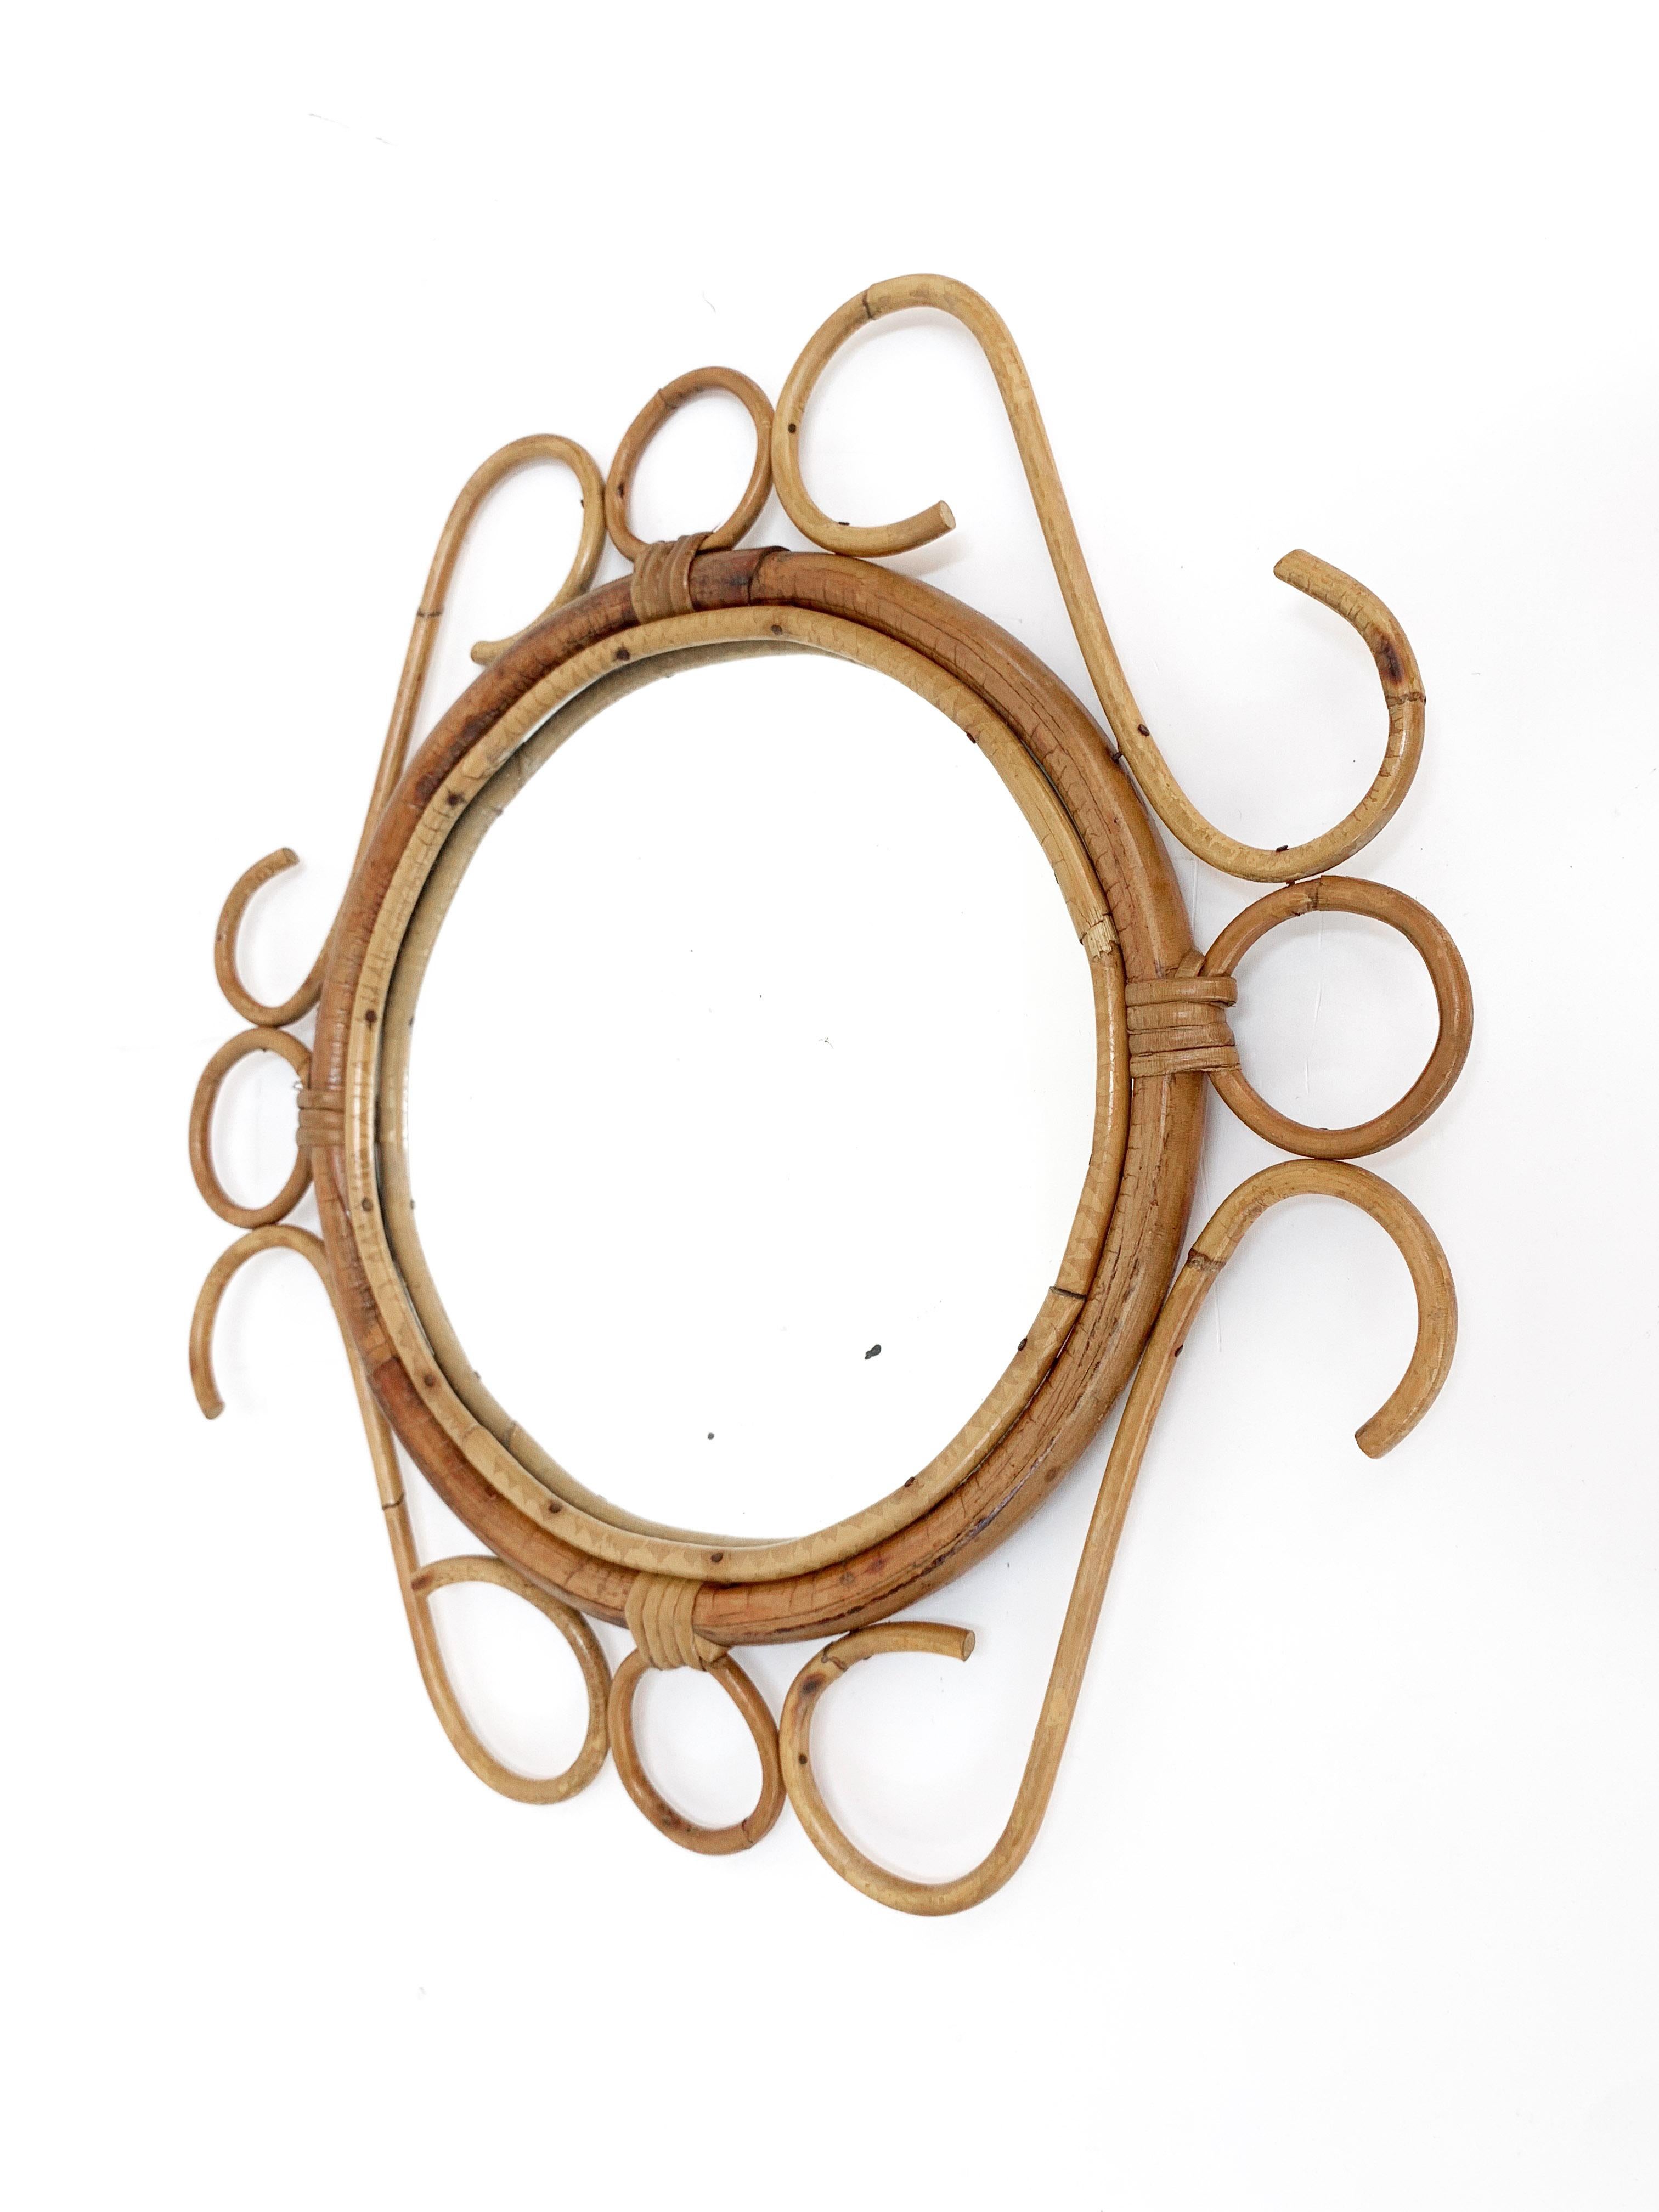 Mid-20th Century French Riviera Round Wall Mirror with Bamboo and Rattan Frame after Albini 1960s